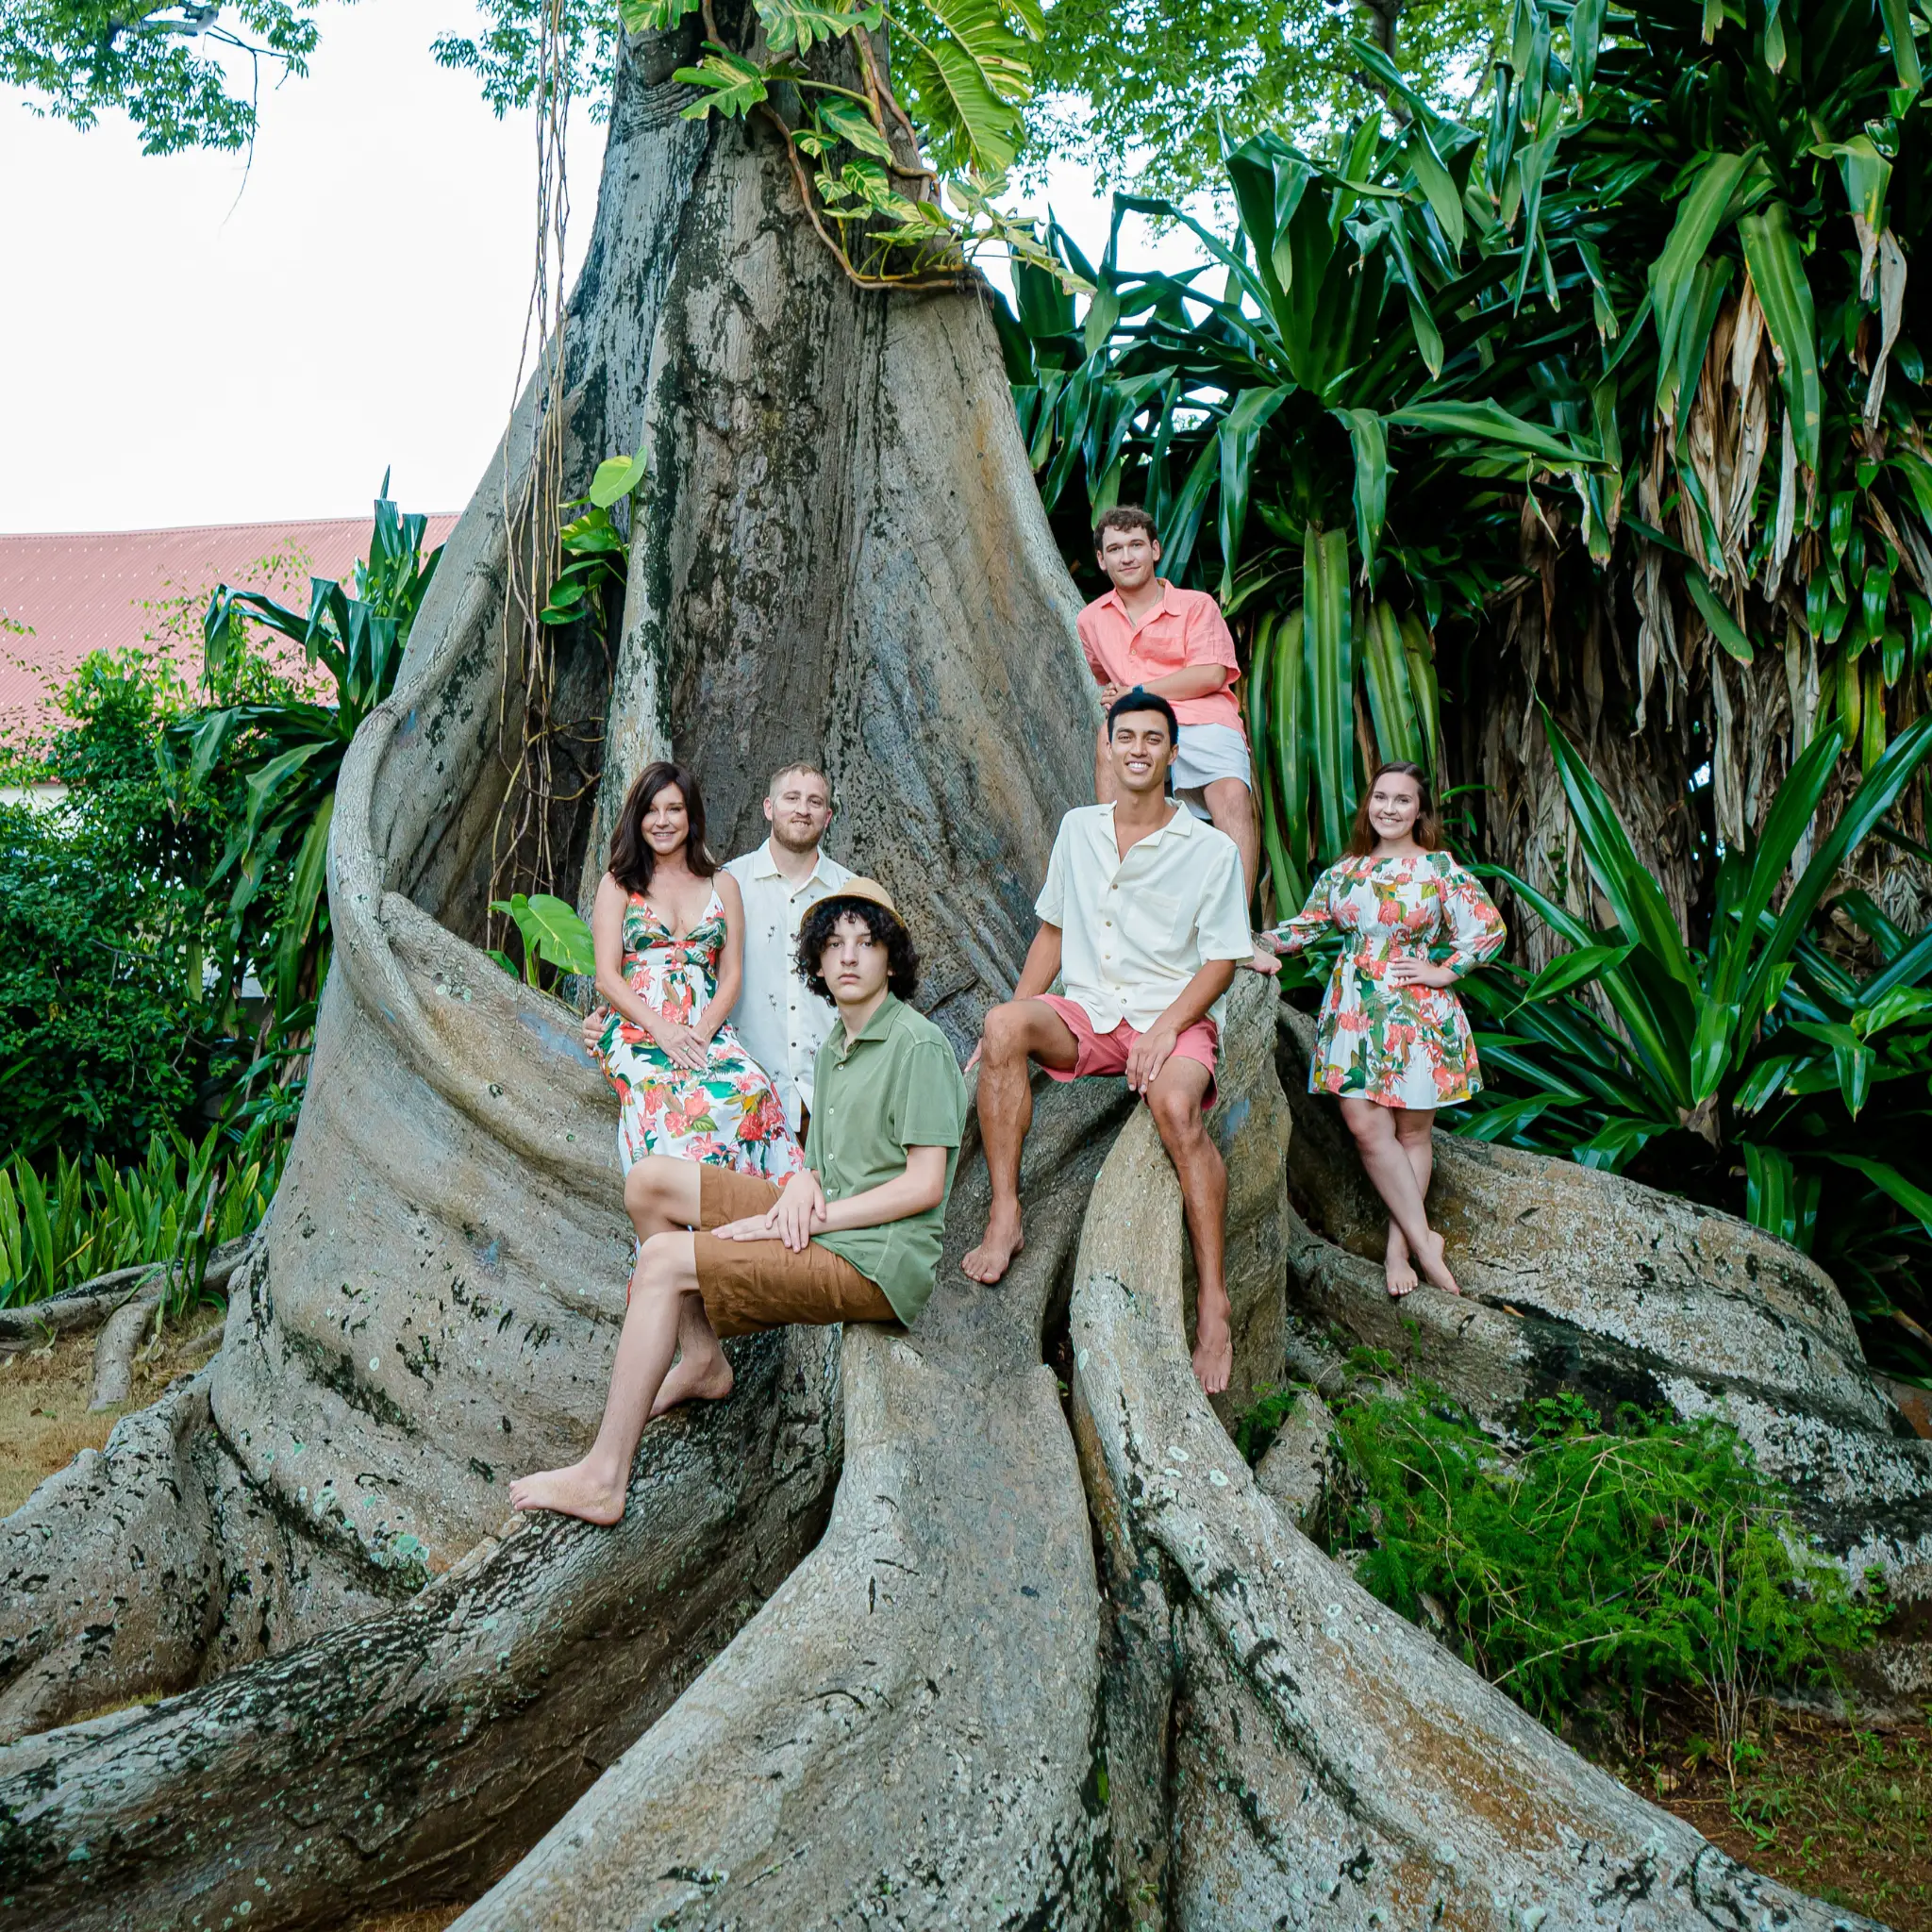 Family photoshoot by Stacey, Localgrapher in Negril